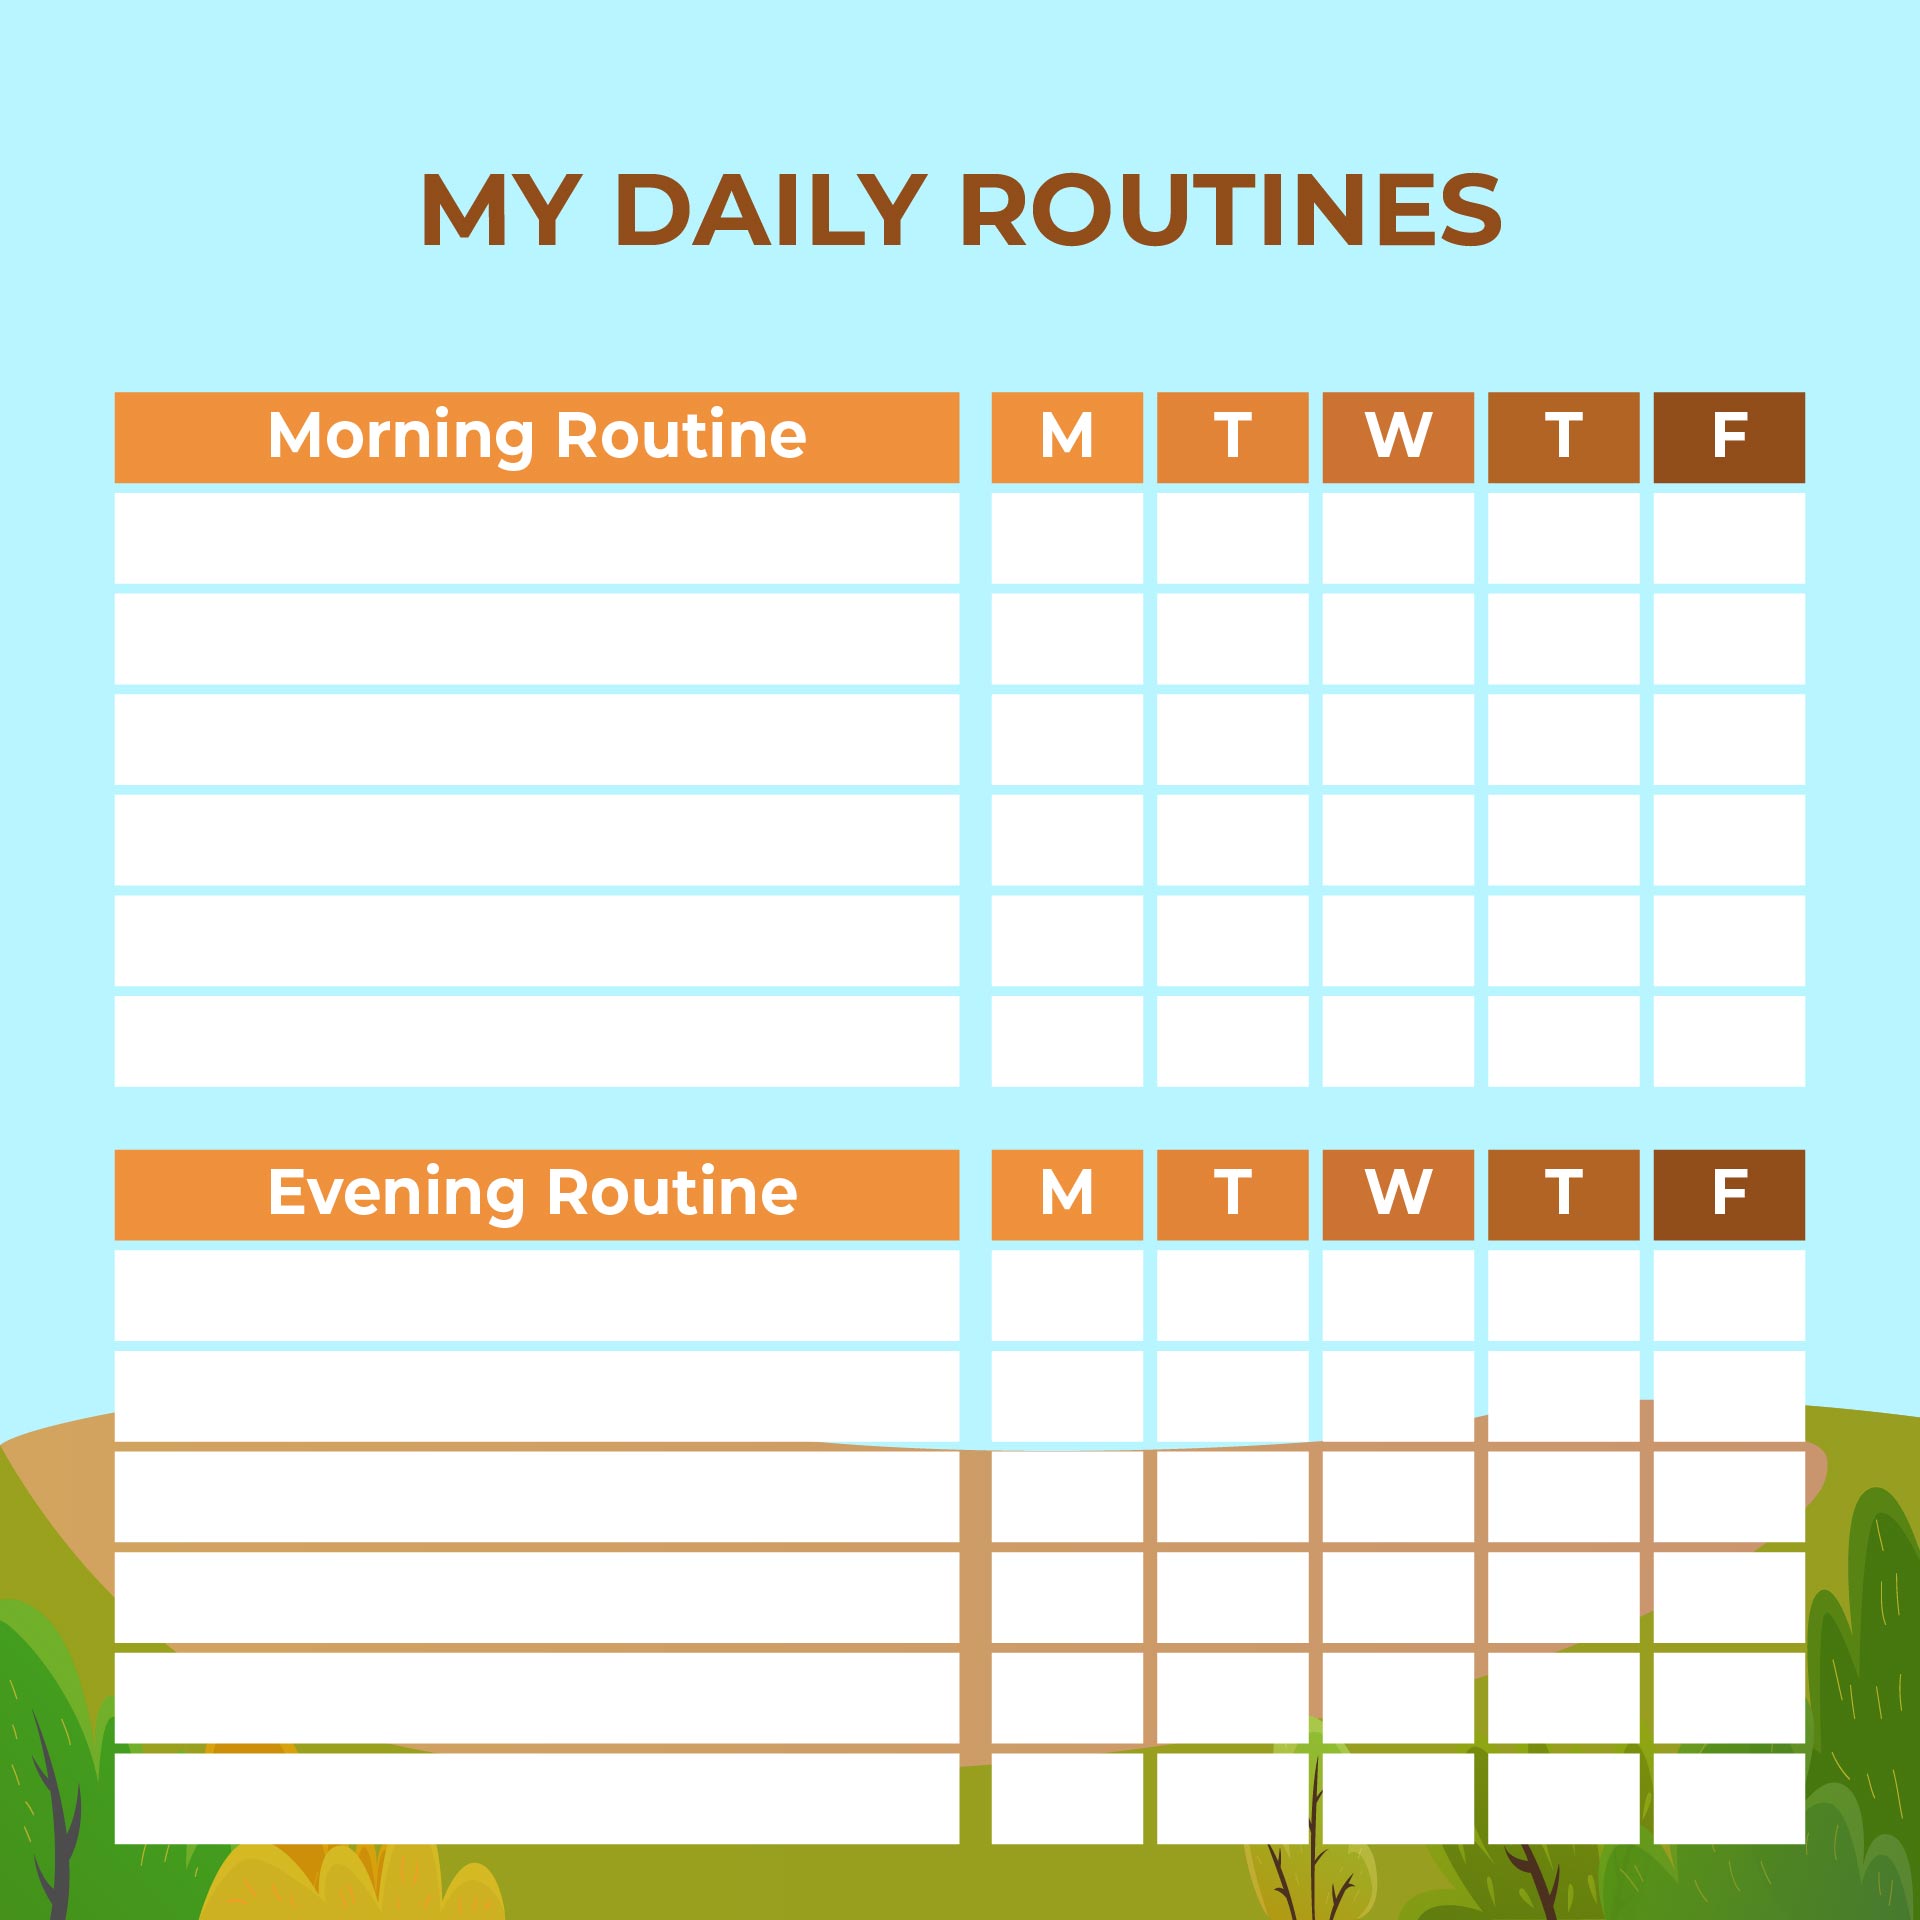 paper-party-supplies-routine-chart-for-kids-routine-cards-weekly